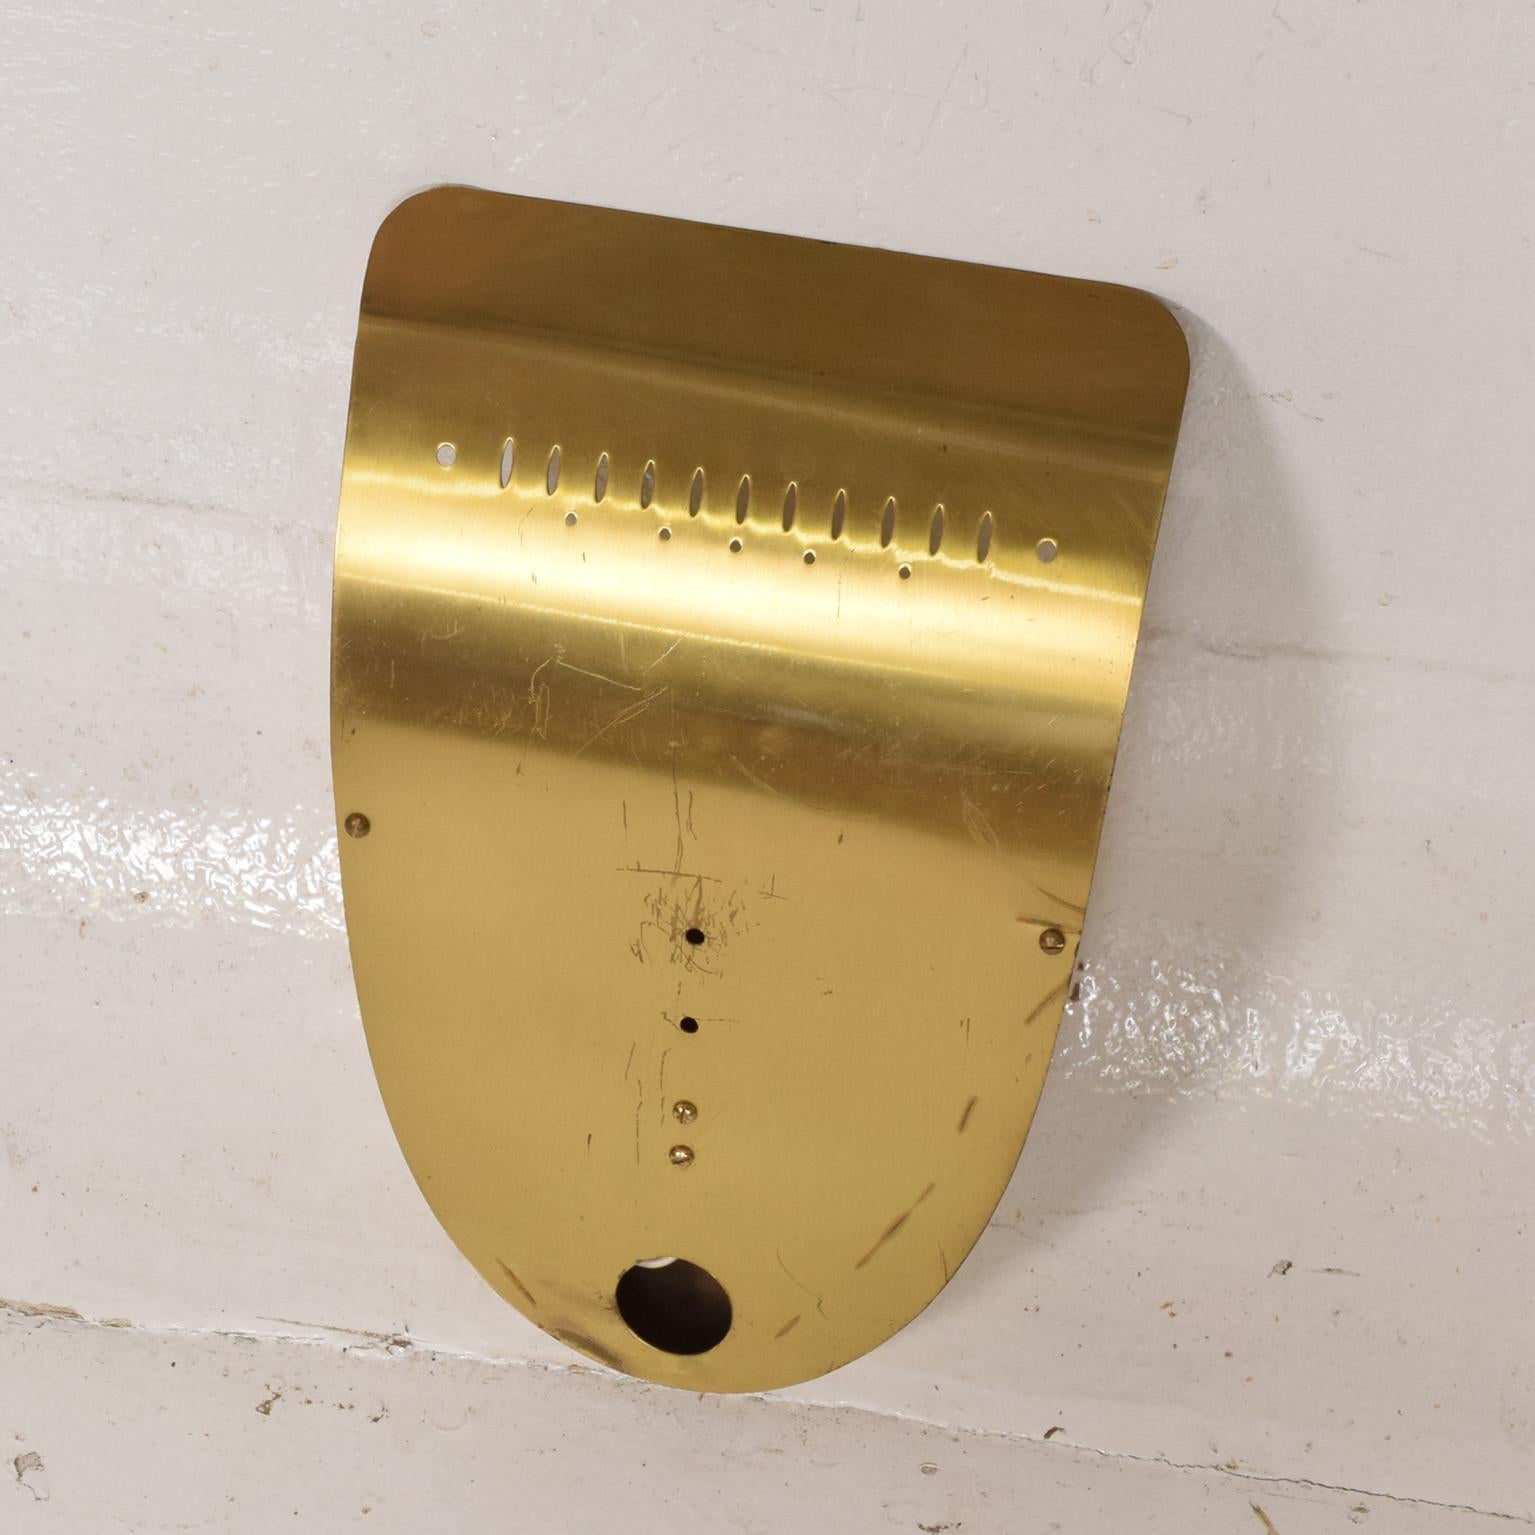 For your consideration, a Mid-Century Modern brass shield sconce after Gio Ponti.

Made in Italy, circa the 1950s.

Very good condition. 

Dimensions: 12